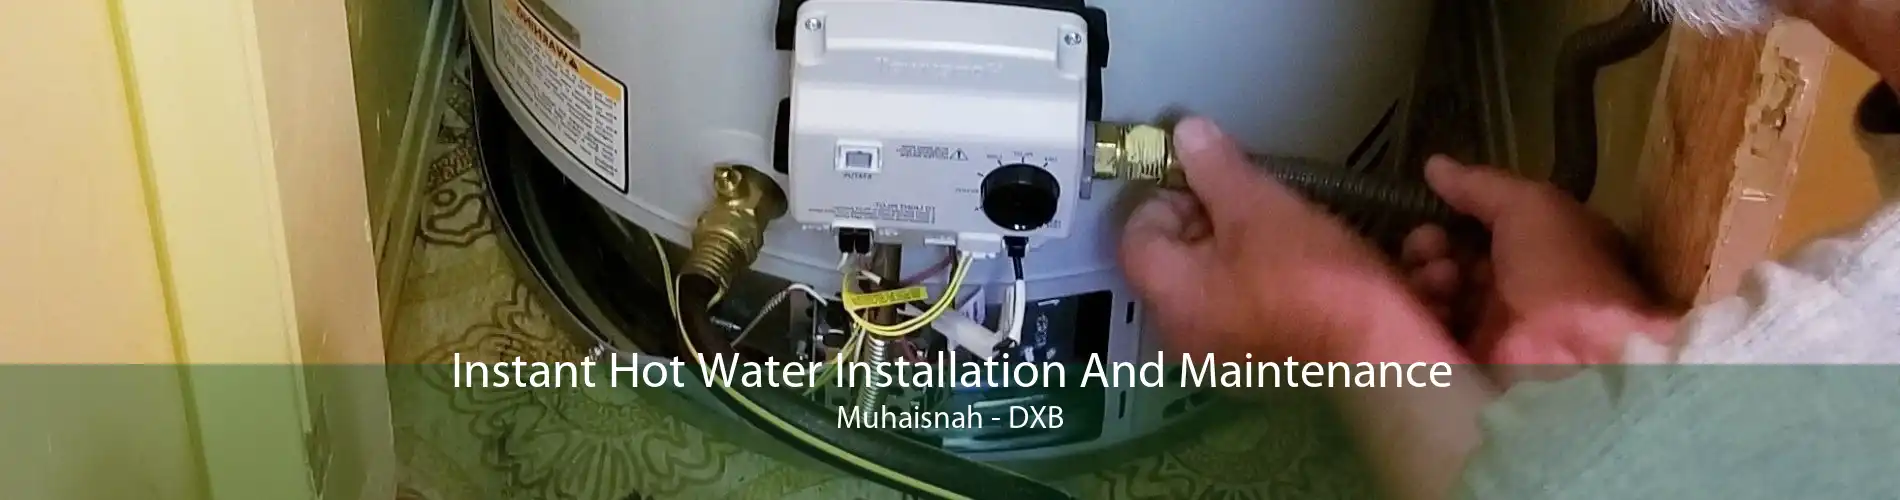 Instant Hot Water Installation And Maintenance Muhaisnah - DXB